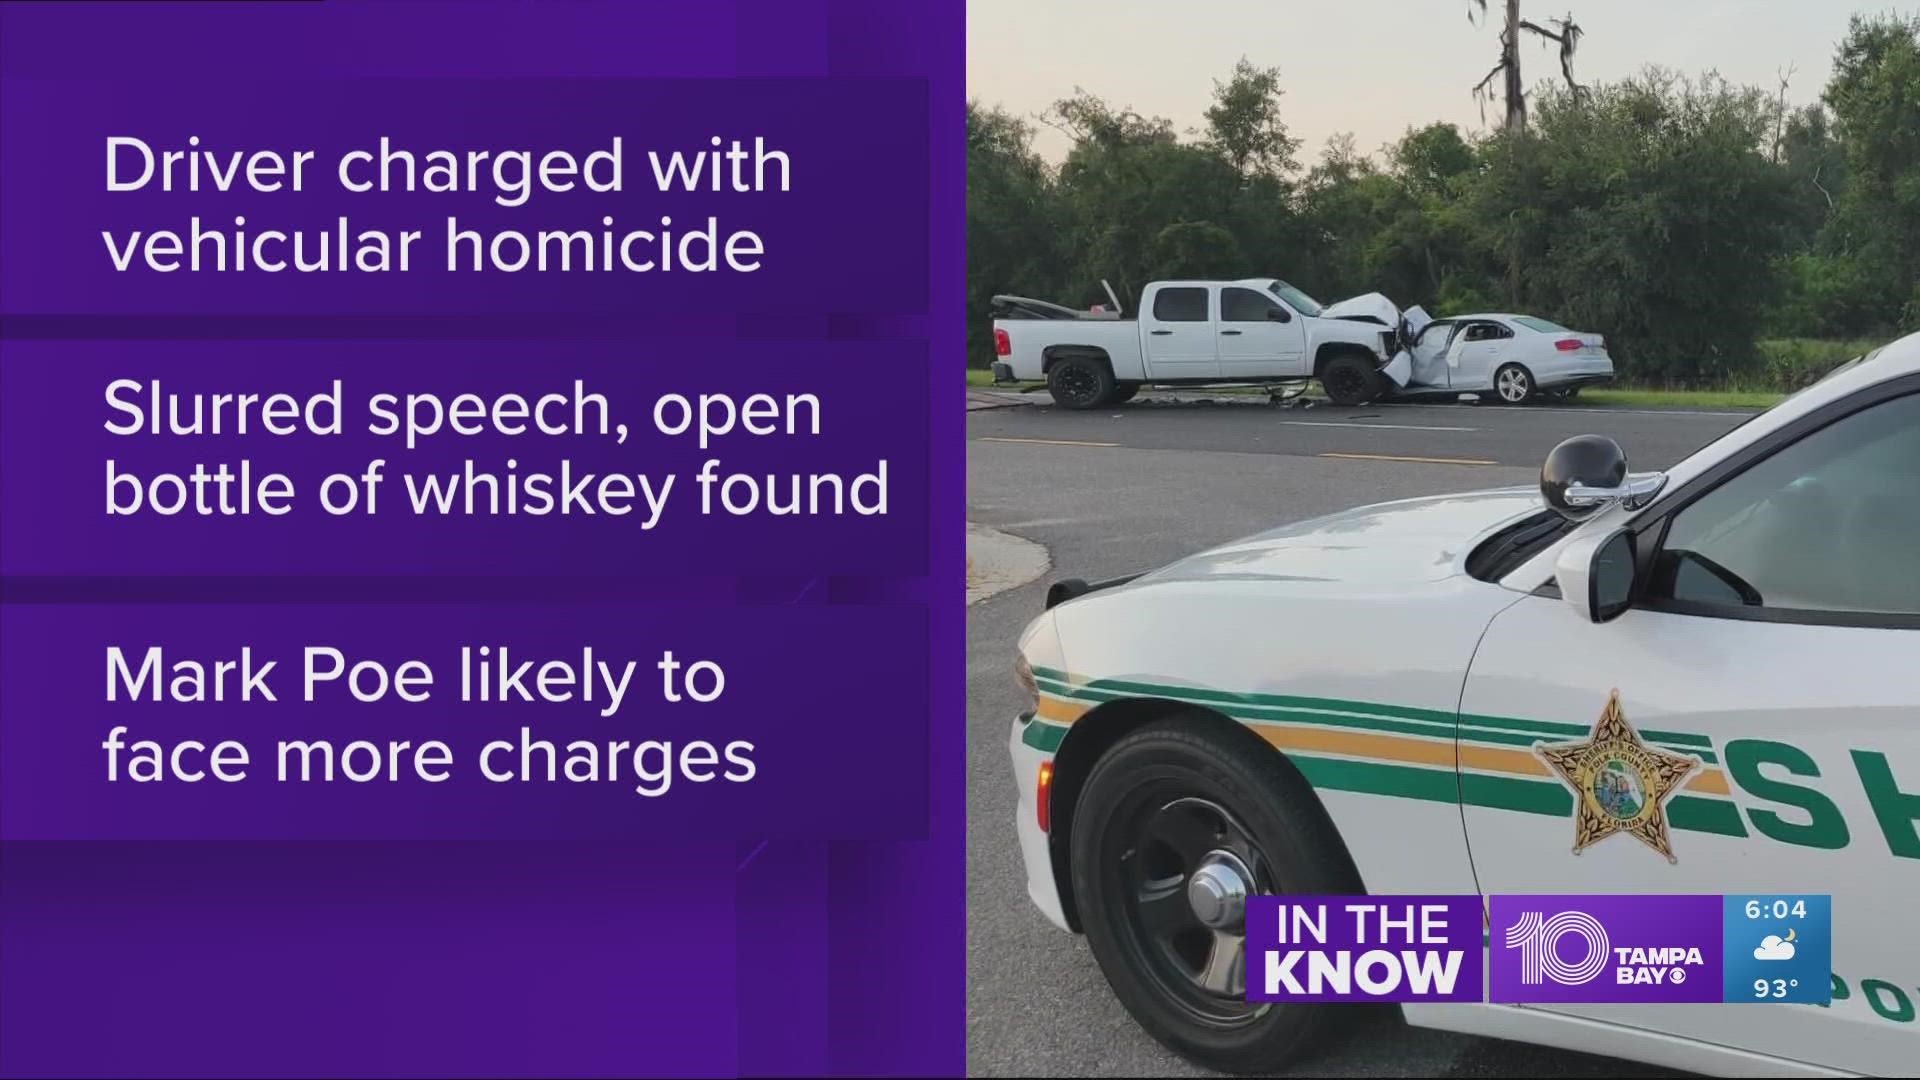 Deputies say the man had bloodshot eyes and slurred speech at the time of the crash. And, they could smell alcohol and found an open beer bottle inside his truck.